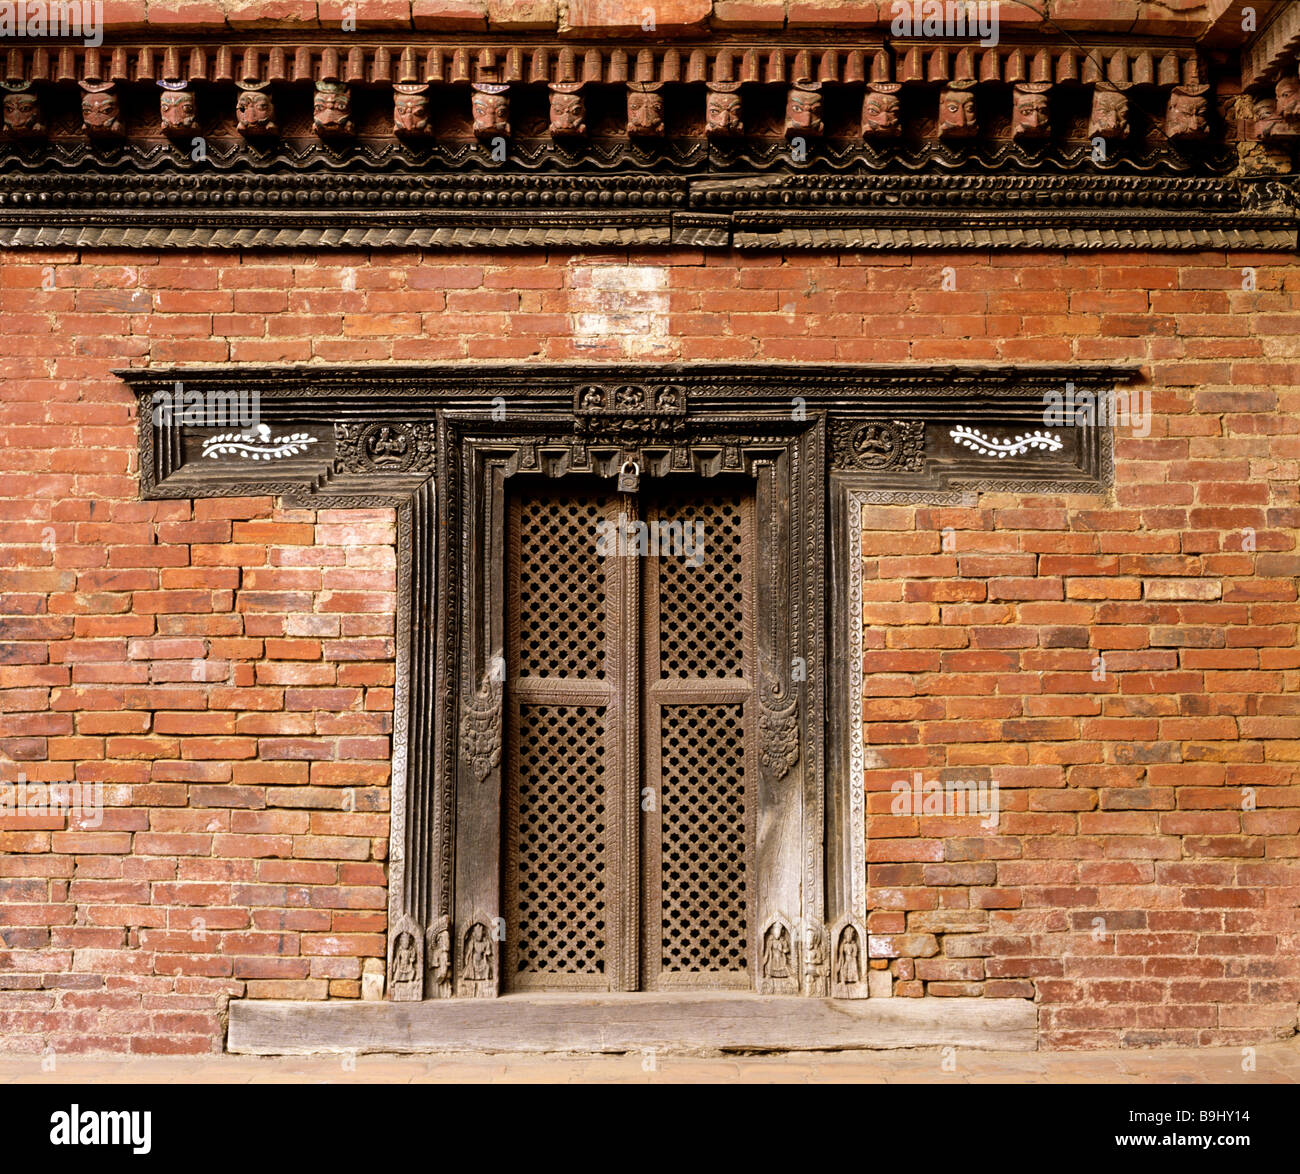 Decorated wooden door on the royal palace, Patan, Lalitpur, Nepal, South Asia Stock Photo